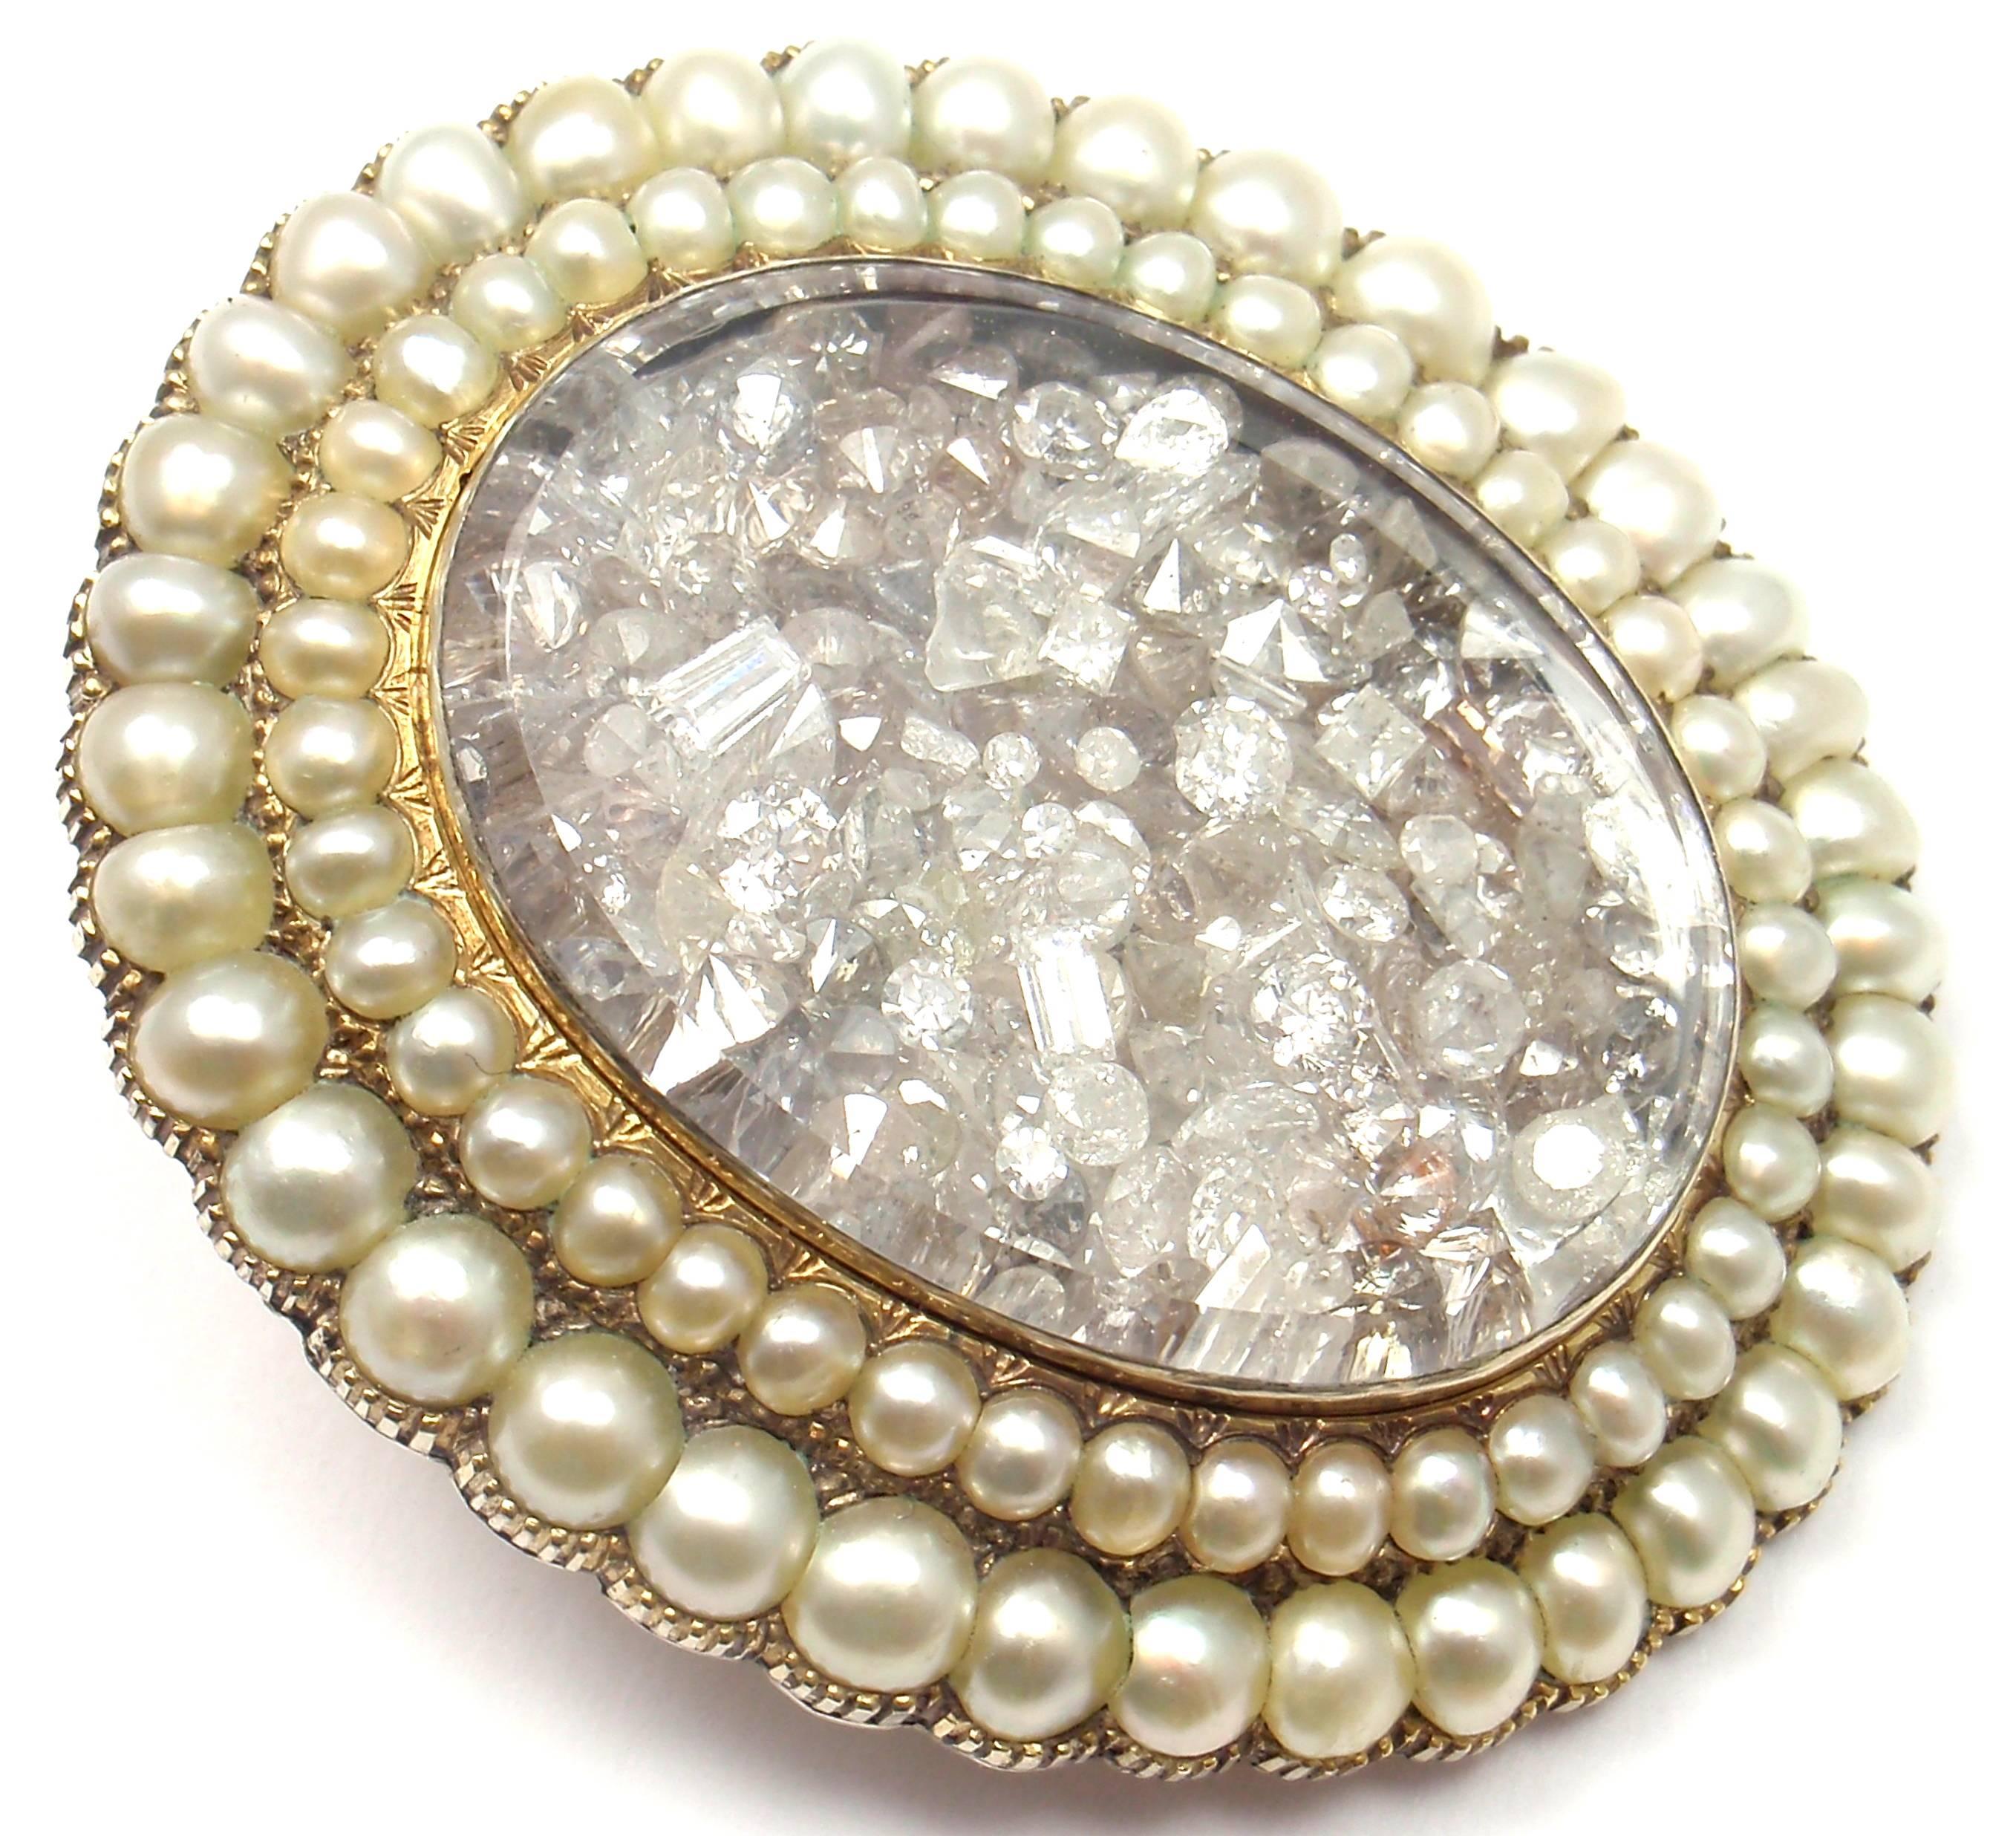 18k Yellow Gold Diamond And Natural Pearl Brooch by Renee Lewis. 
With Diamonds VS2 clarity, G color total weight approx. 9.88ct
76 Natural Pearls
Details: 
Measurements: 1 3/4